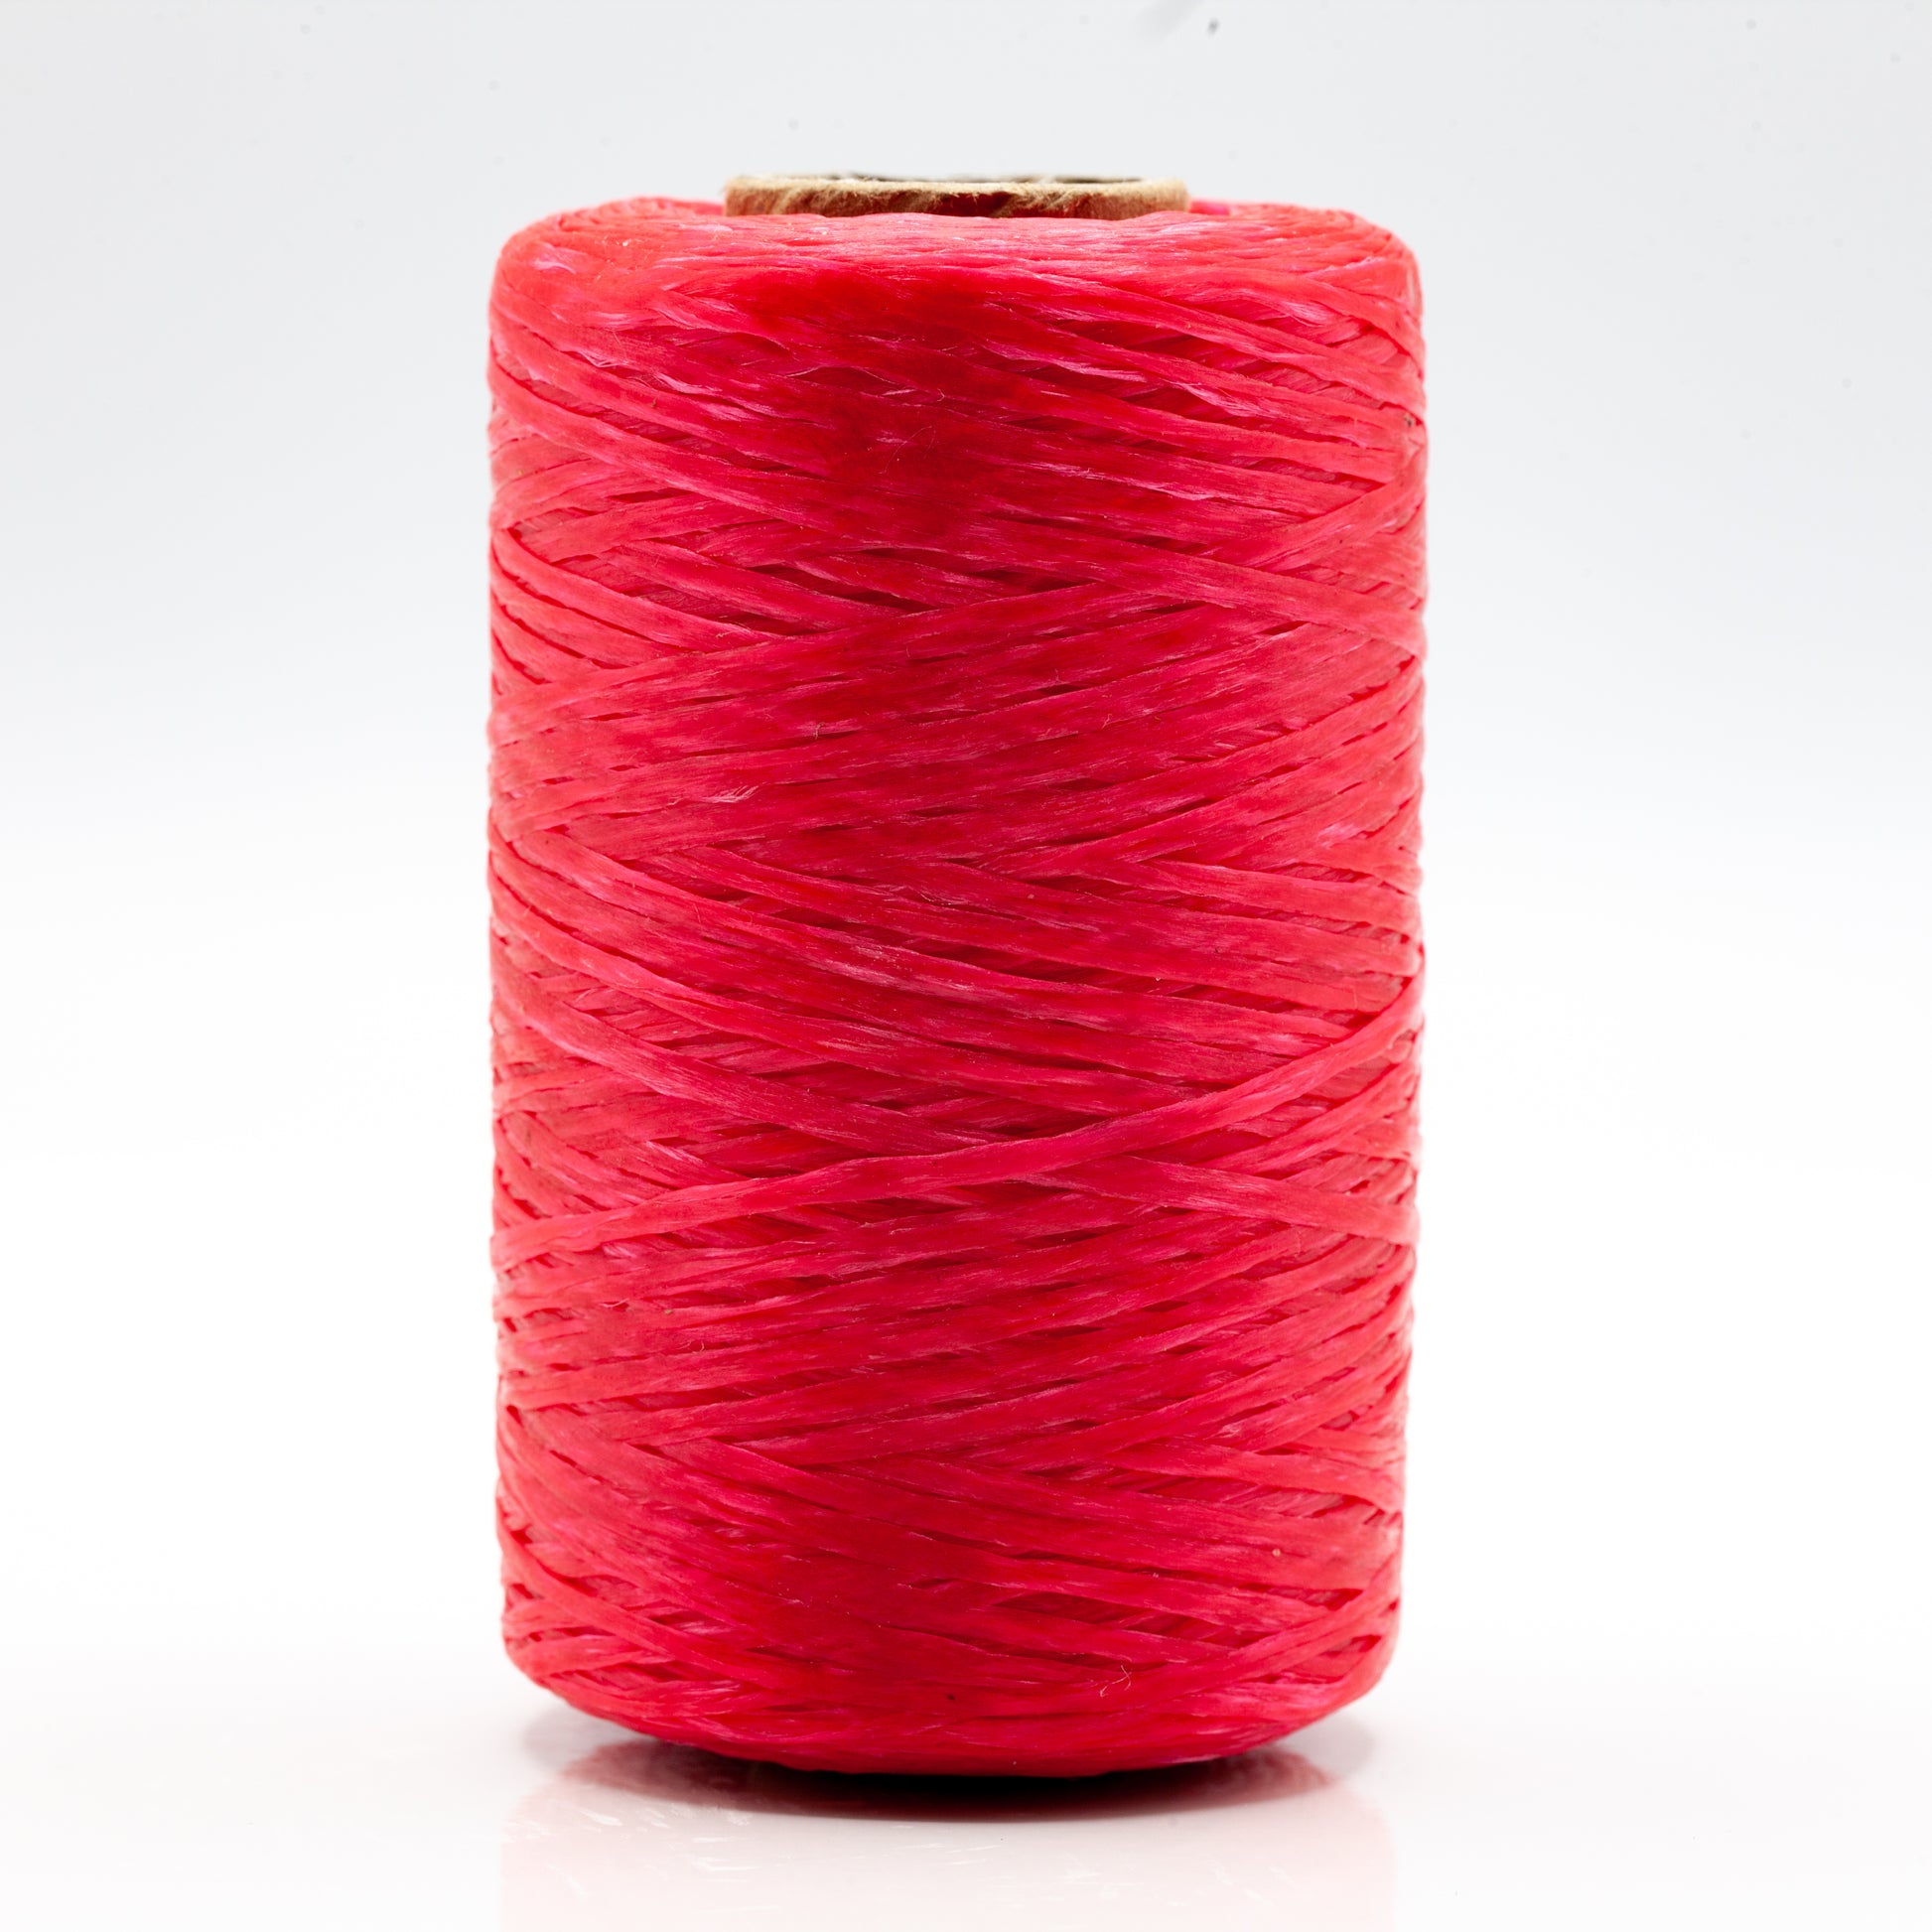 Waxed, Artificial Sinew Thread - Pink (stand)